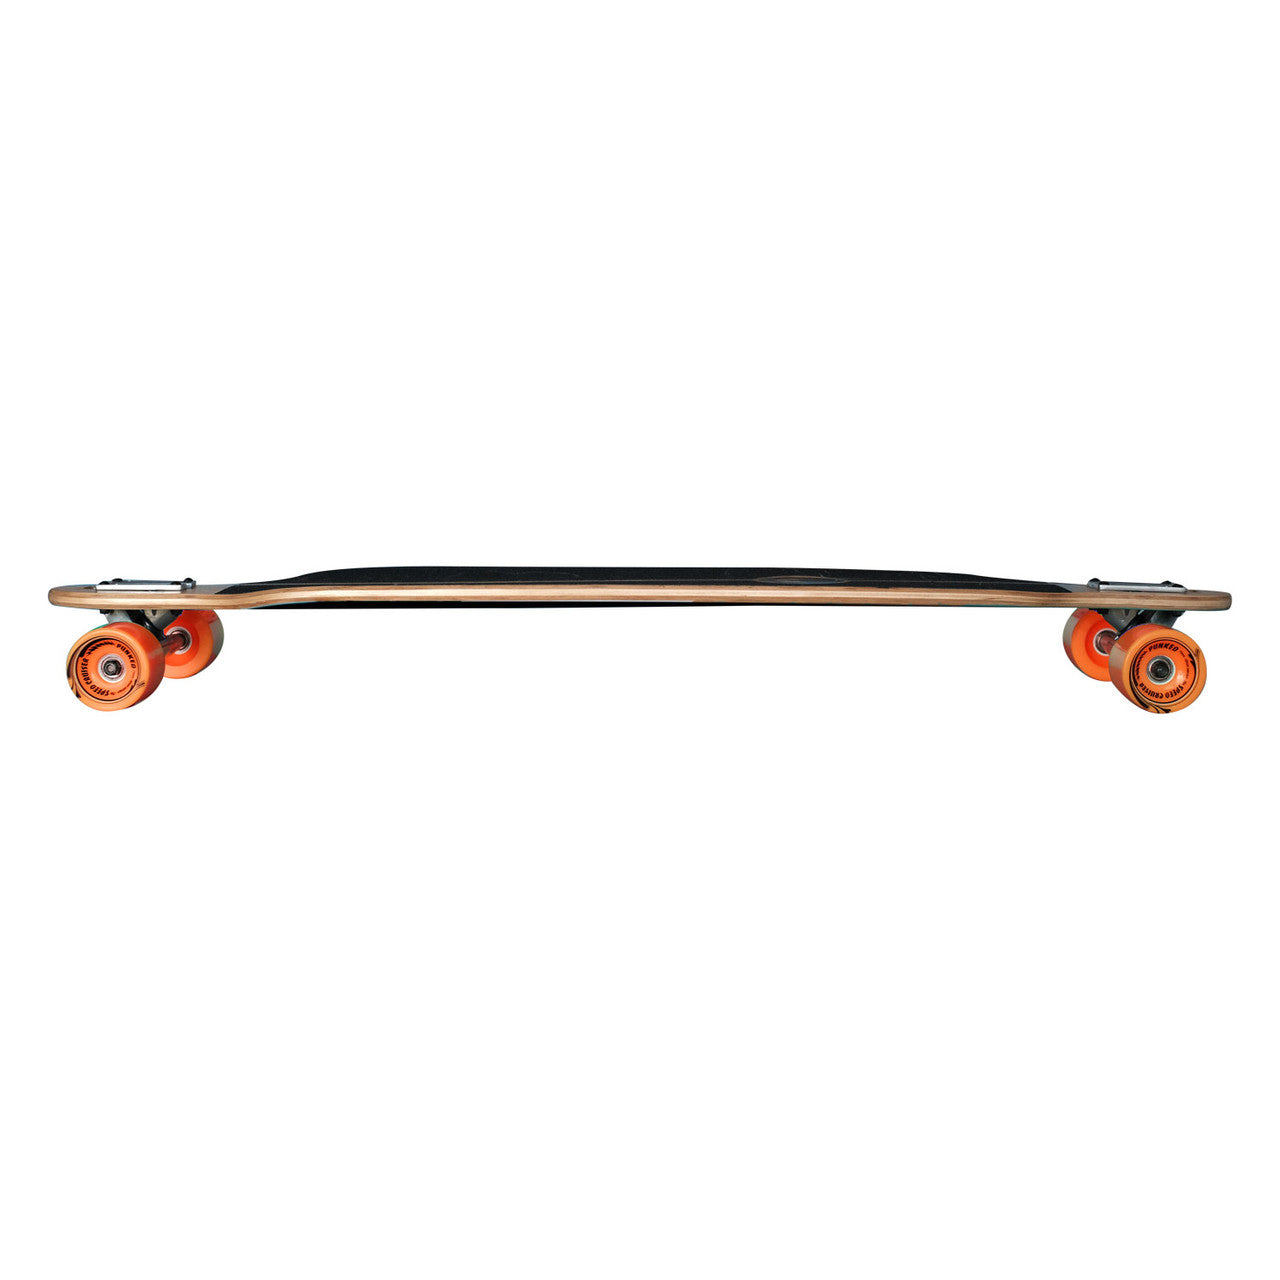 Yocaher Drop Through Longboard Complete - Earth Series - Wind